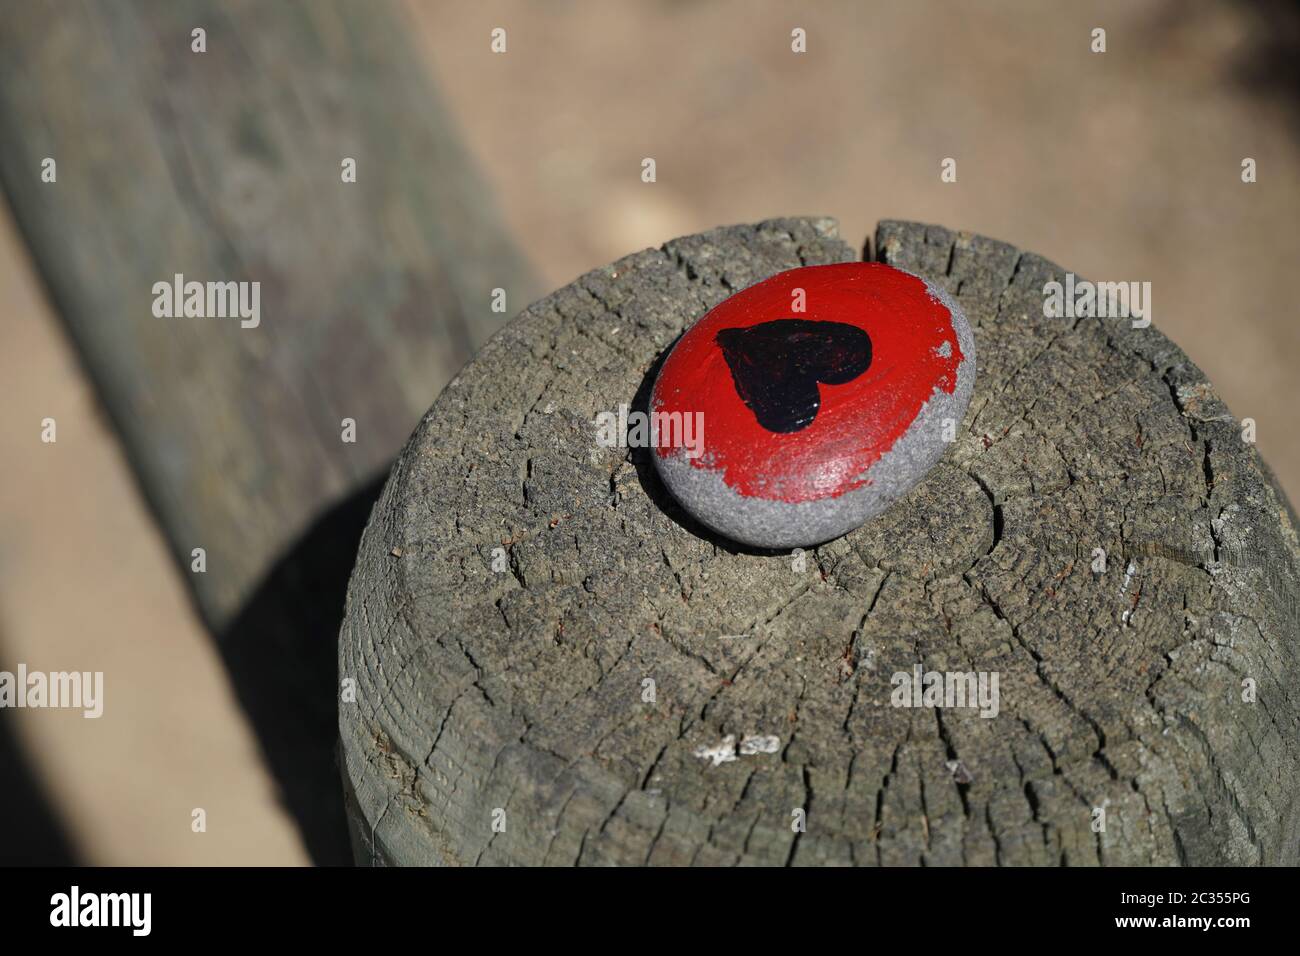 One small flat rock painted red, with a black heart, commemorating the BLM or Black Lives Matter movement. Was placed on a wooden fence post, sunlit. Stock Photo